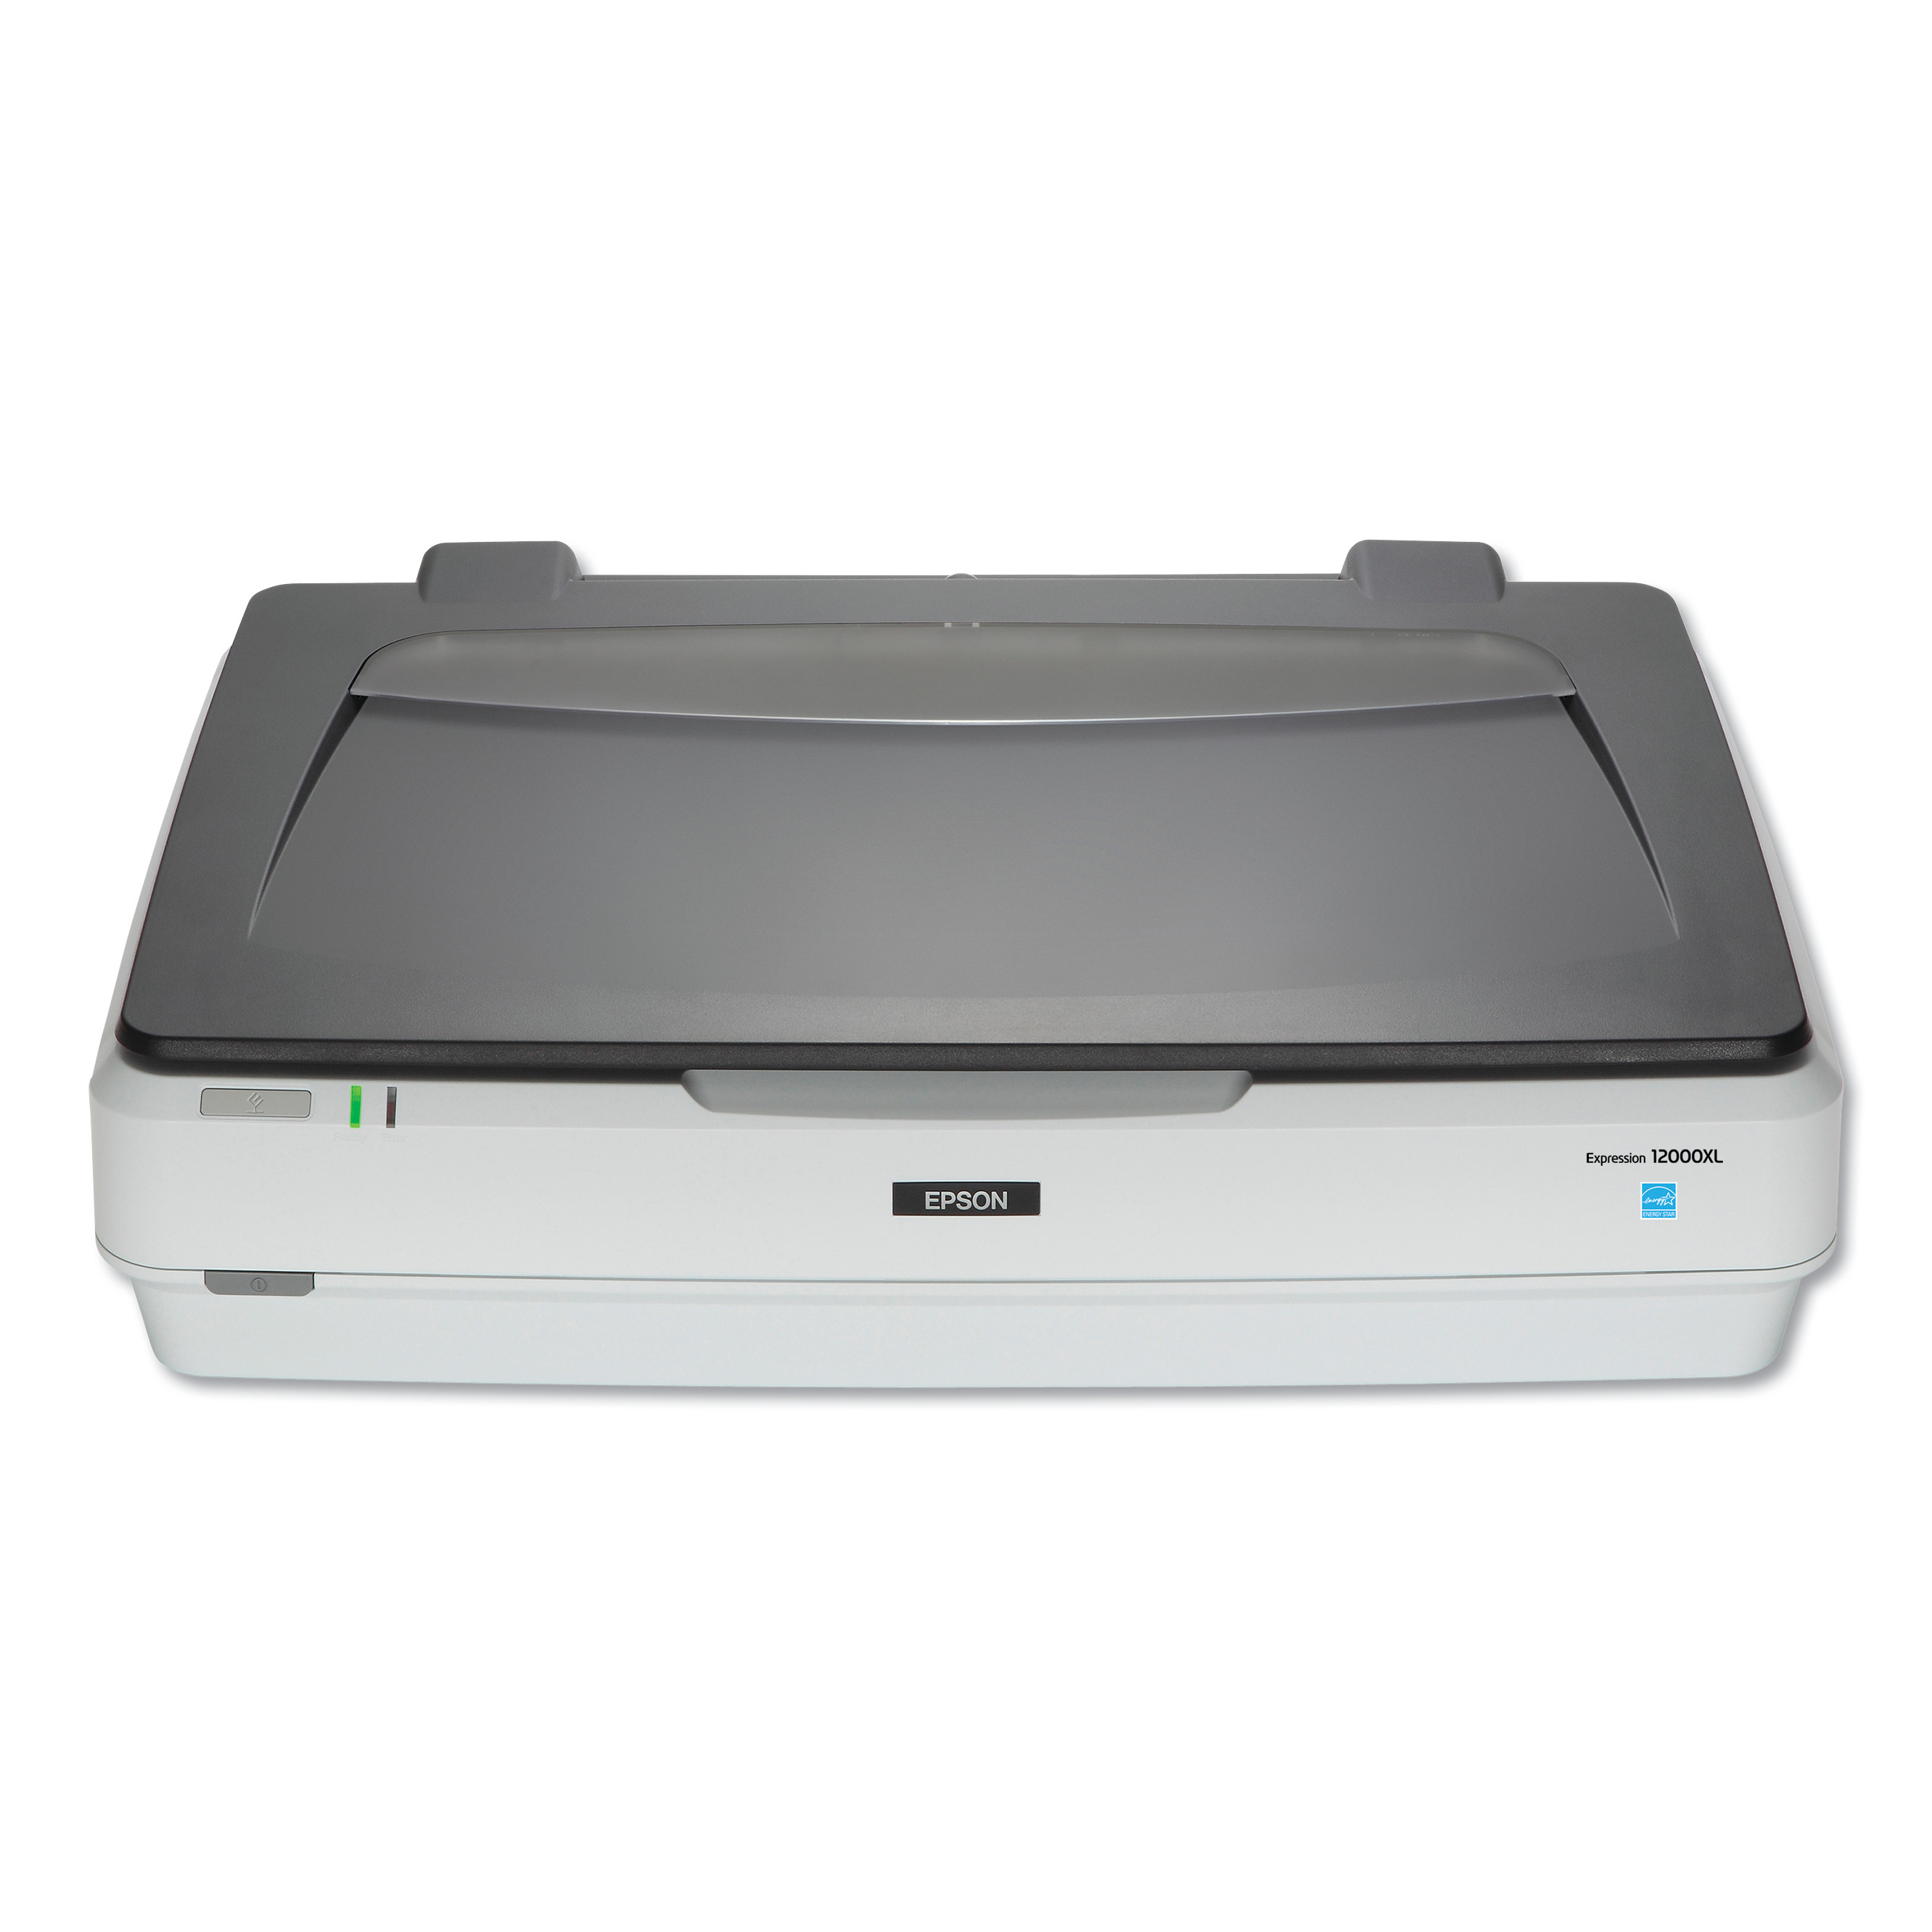  Epson 12000XLGA Expression 12000XL Graphic Arts Scanner, Scan Up to 12.2 x 17.2, 2400 dpi Optical Resolution (EPS12000XLGA) 